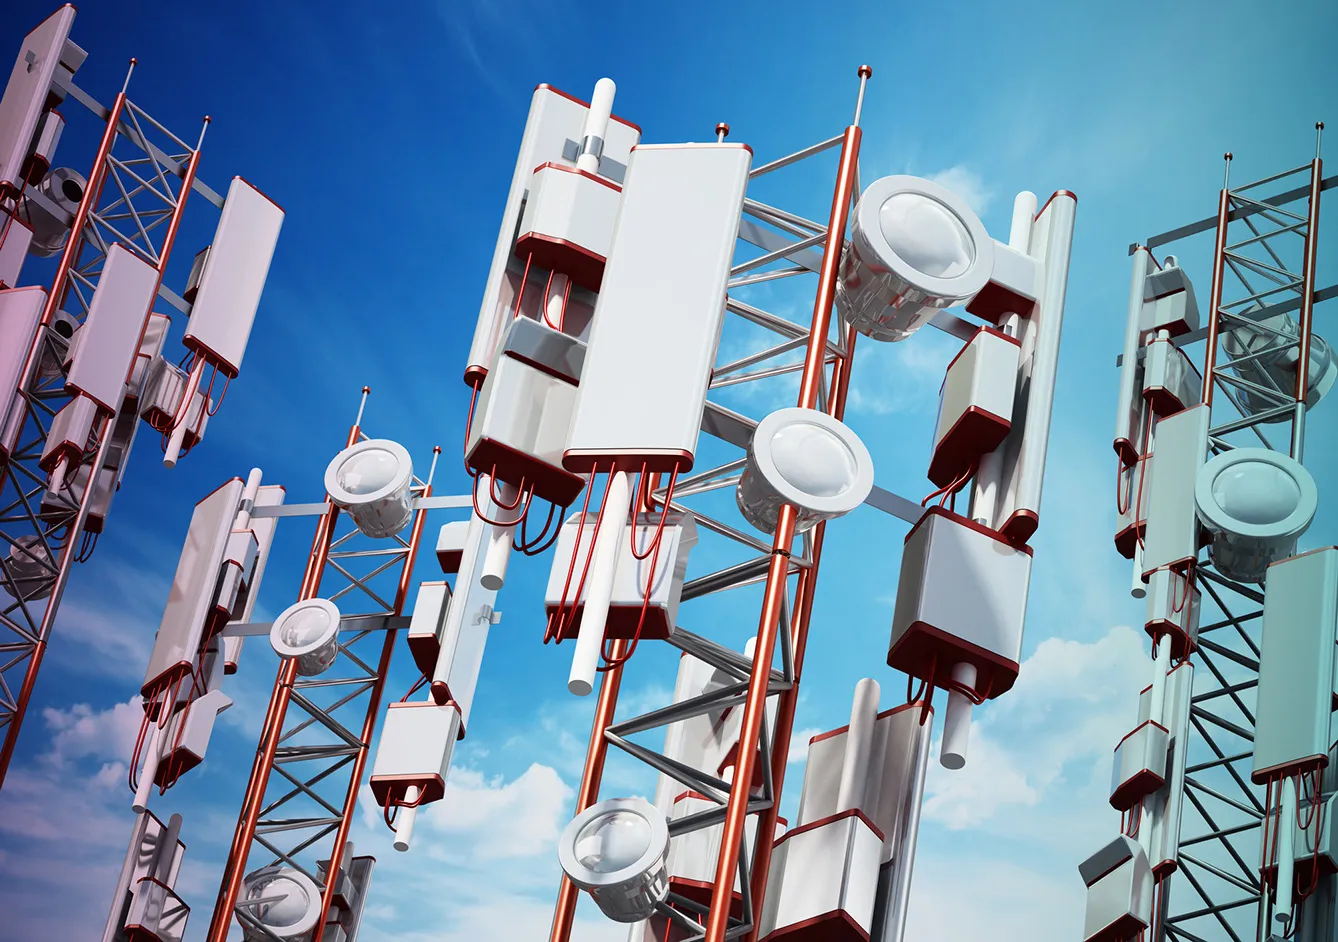 Mobile phone base station towers with electronic equipments.